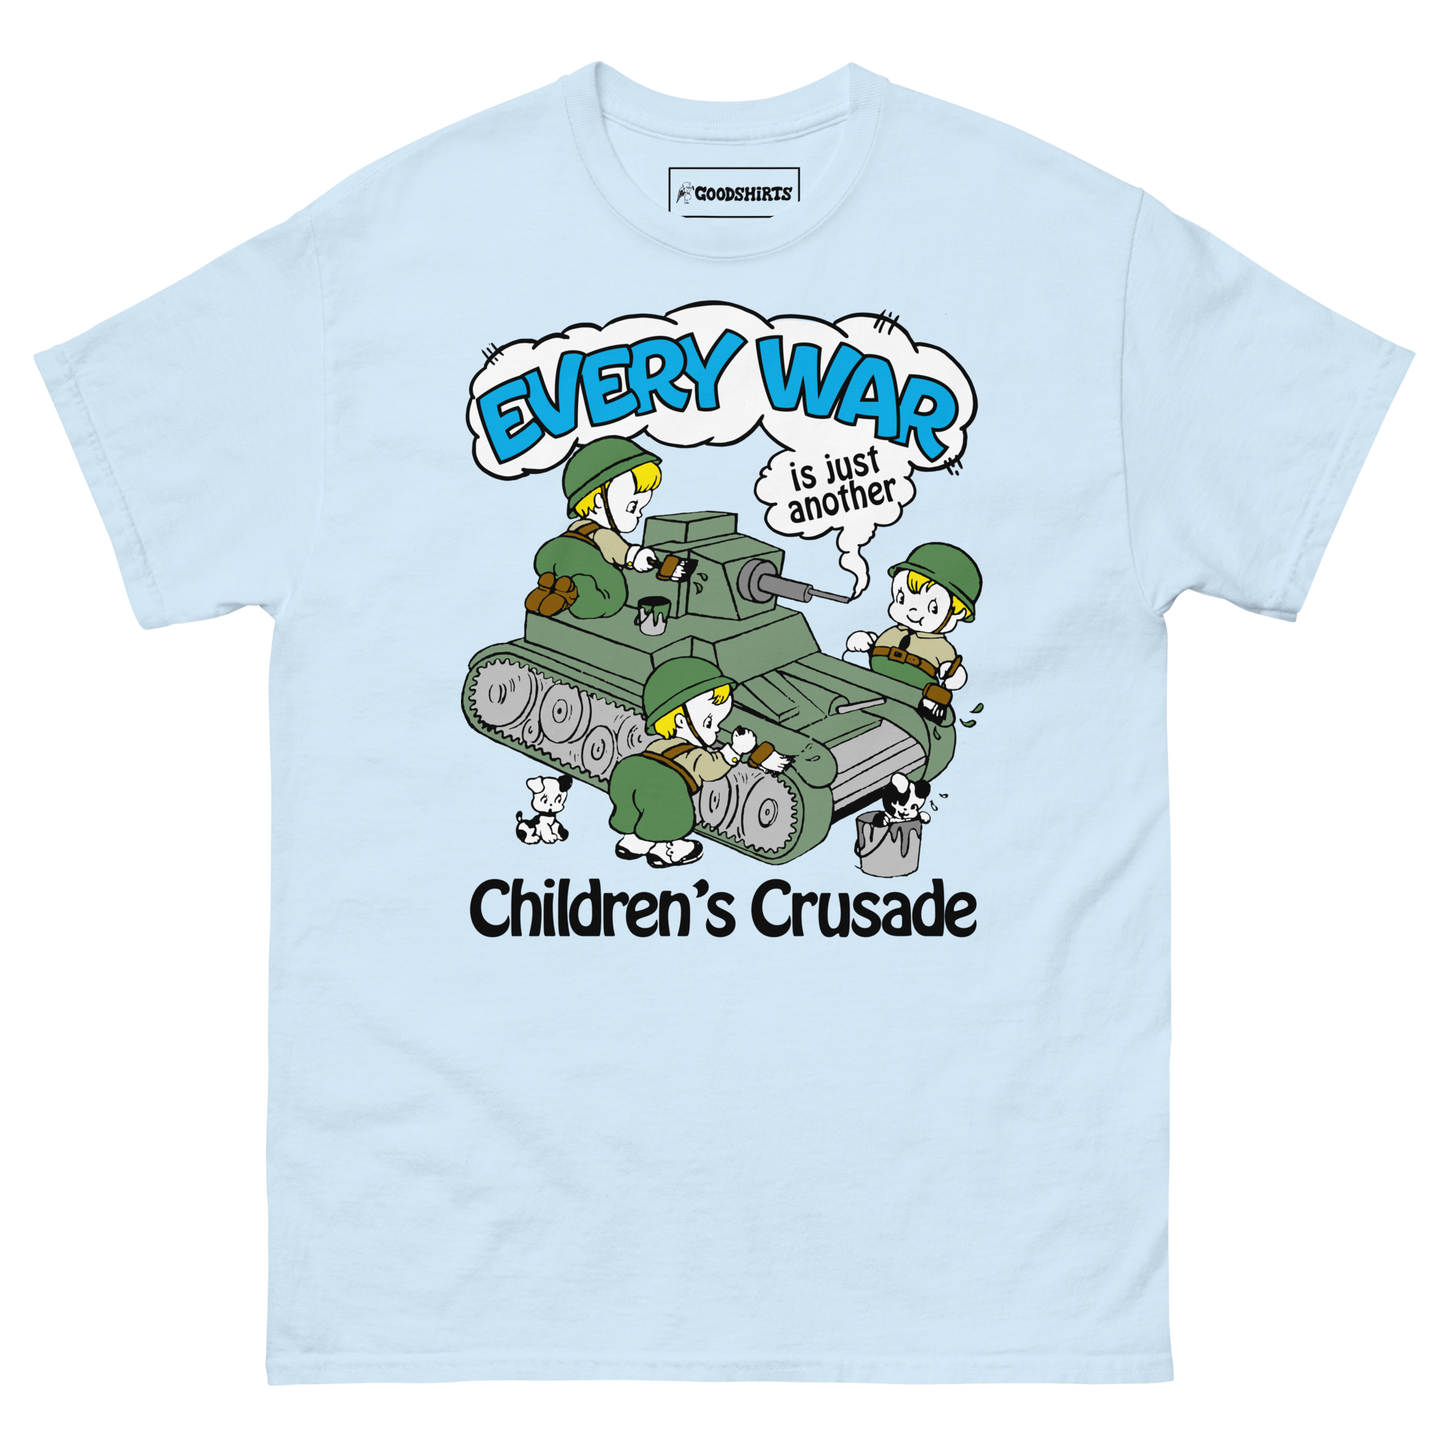 Every War Is Just Another Children's Crusade.